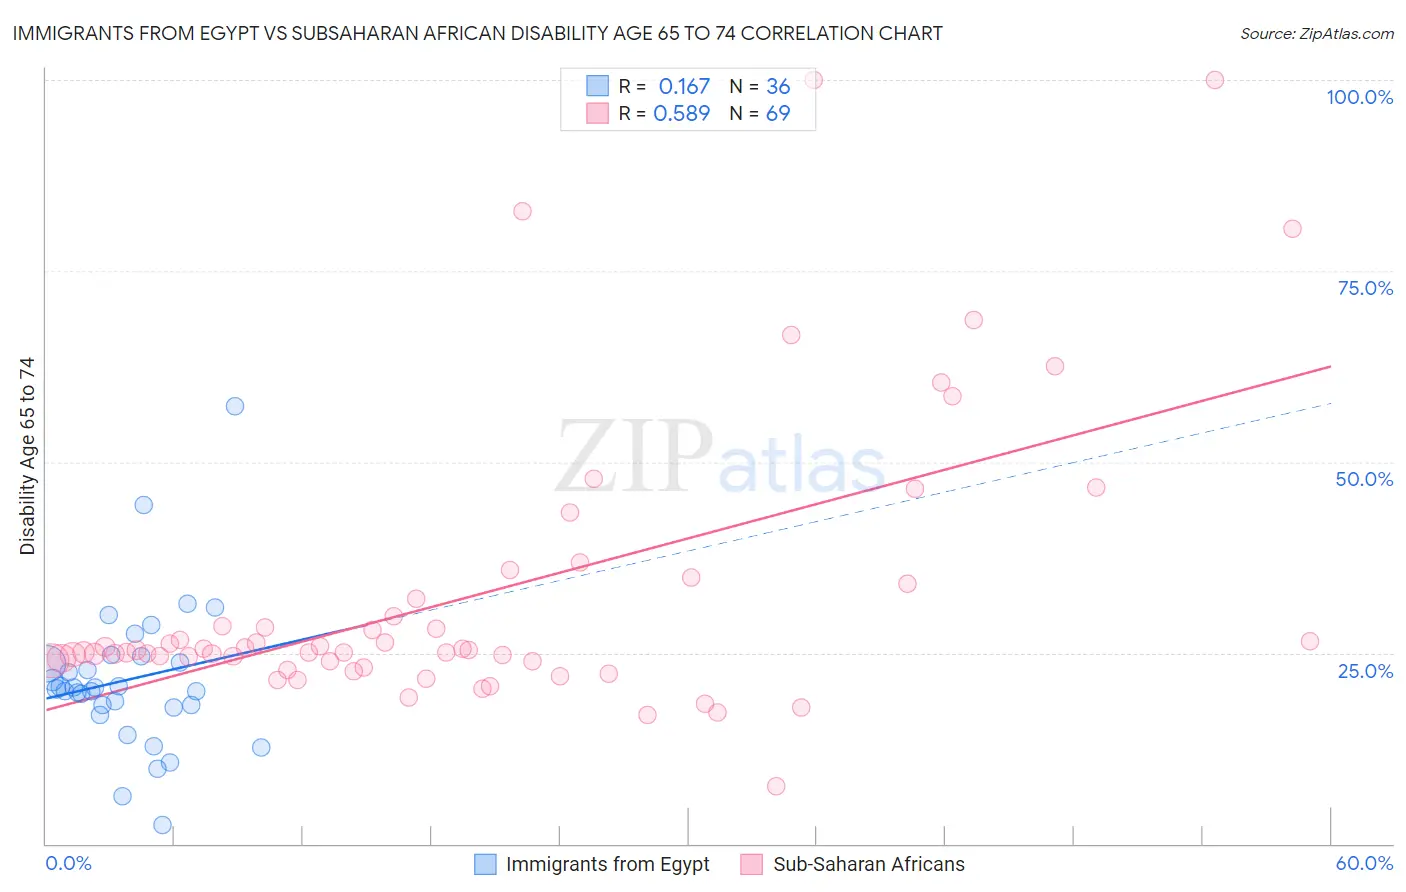 Immigrants from Egypt vs Subsaharan African Disability Age 65 to 74